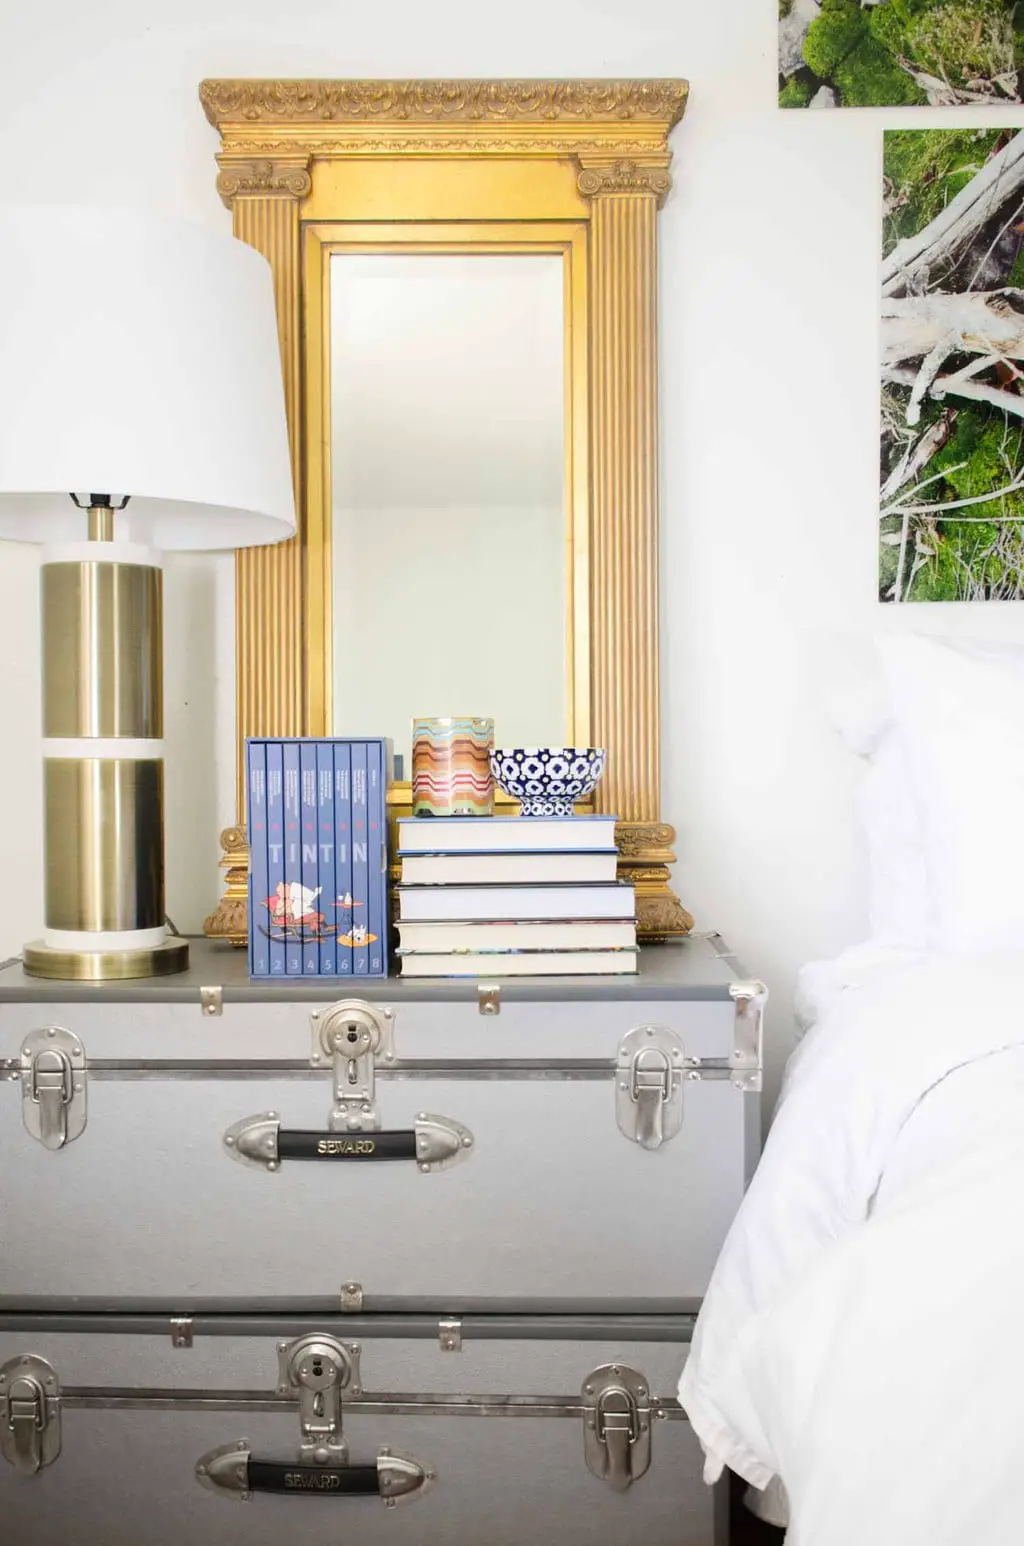 Eclectic bedroom with stacked trunks bedside table and gold mirror via @thouswellblog